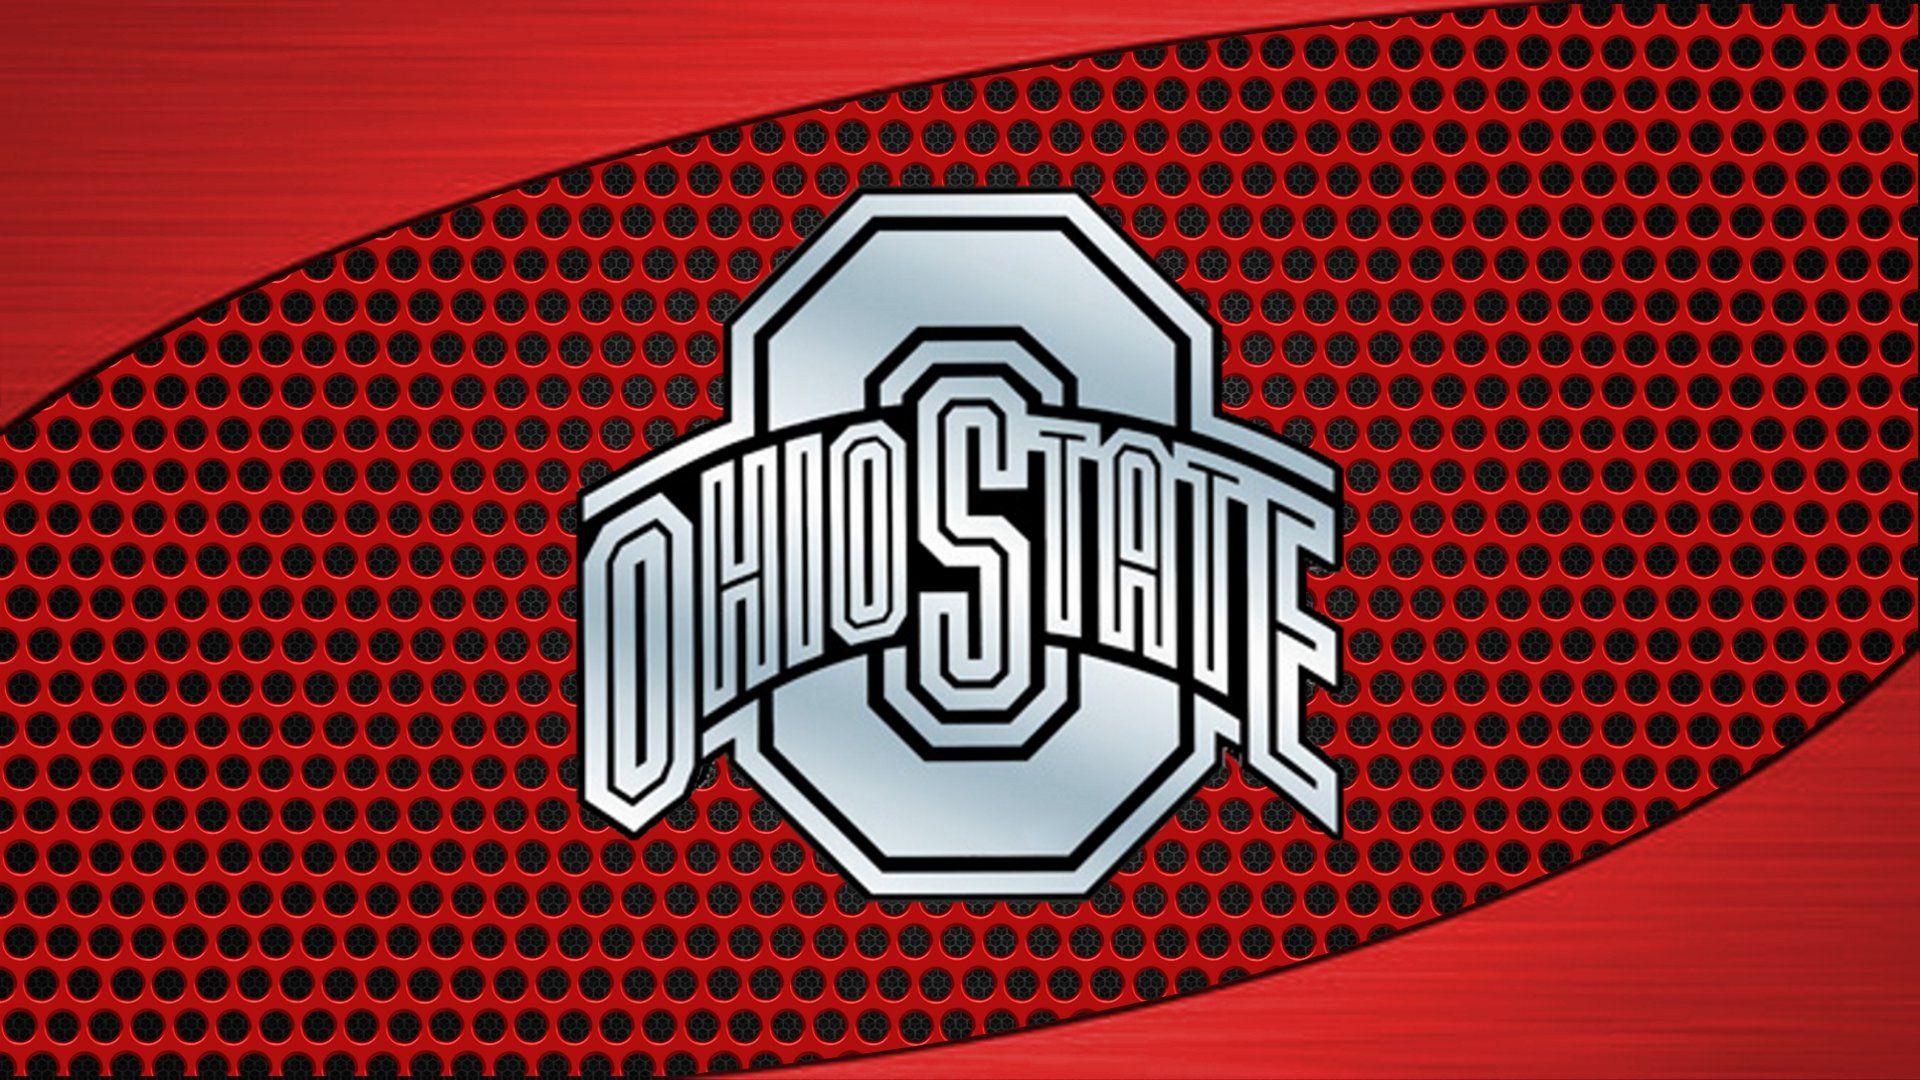 Ohio State Buckeyes Football Background Download